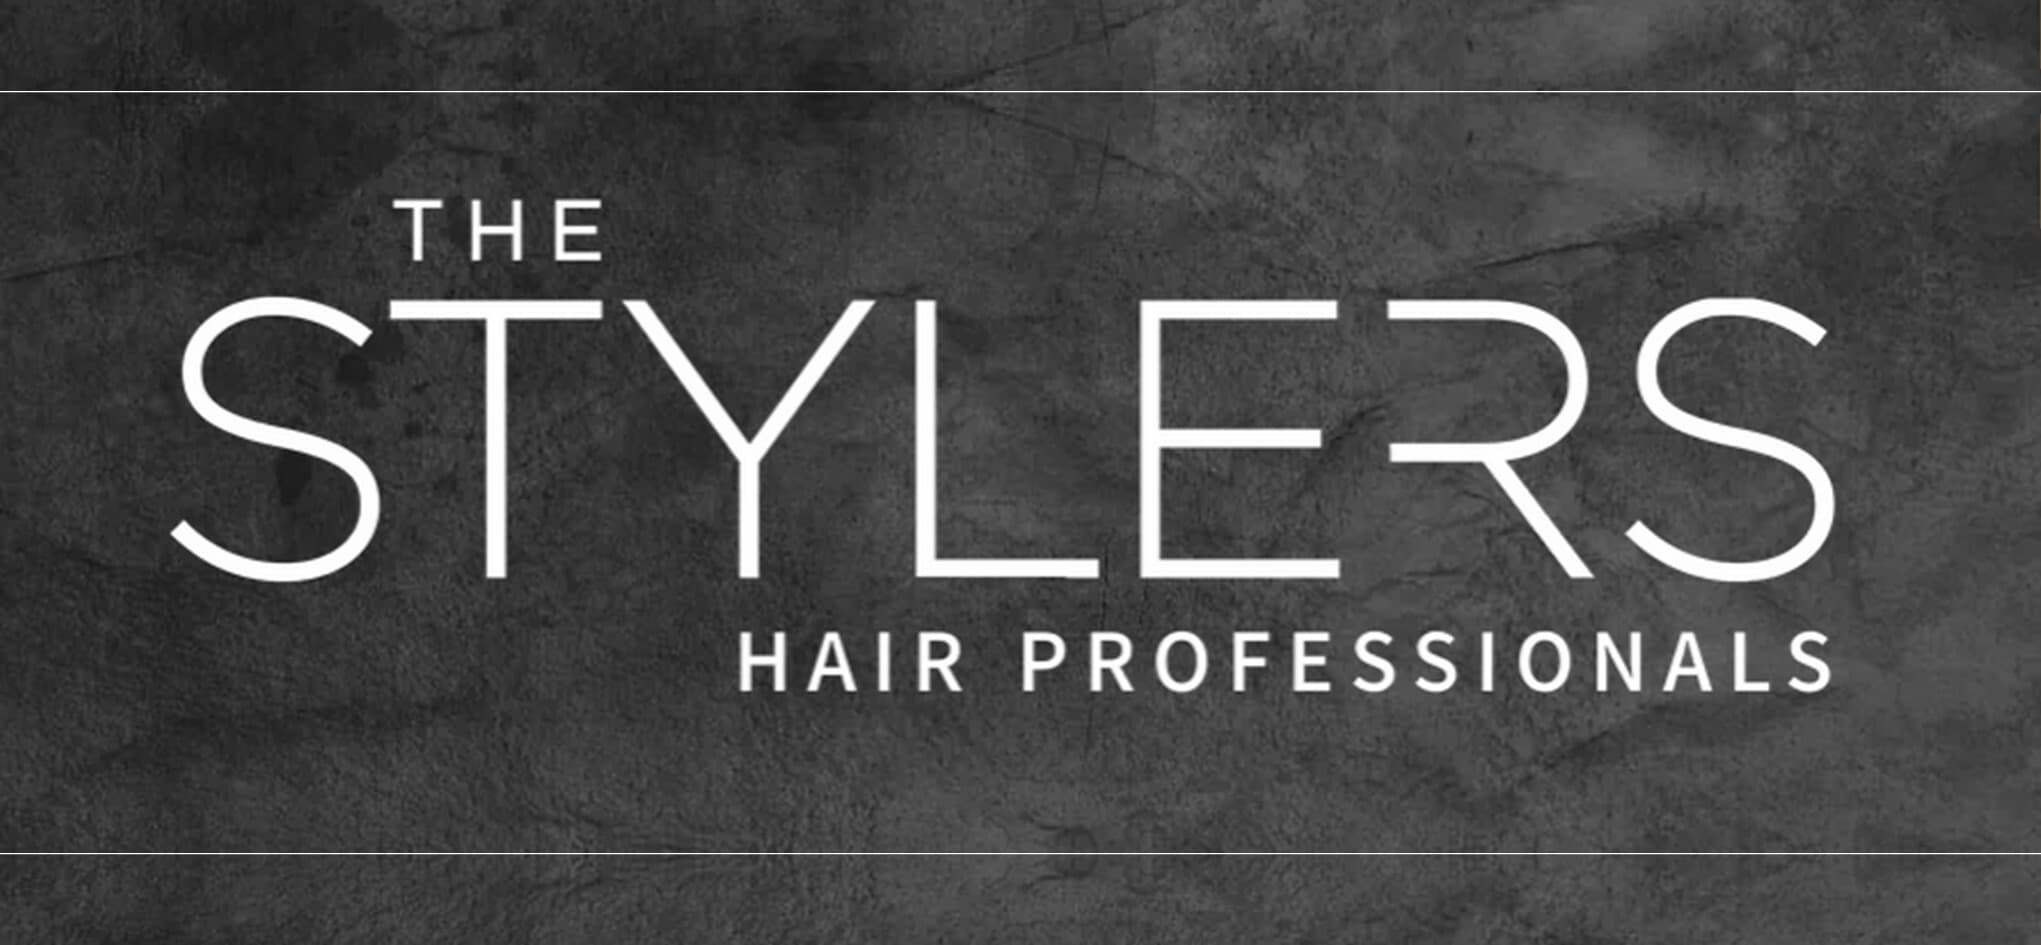 Special offer at The Stylers